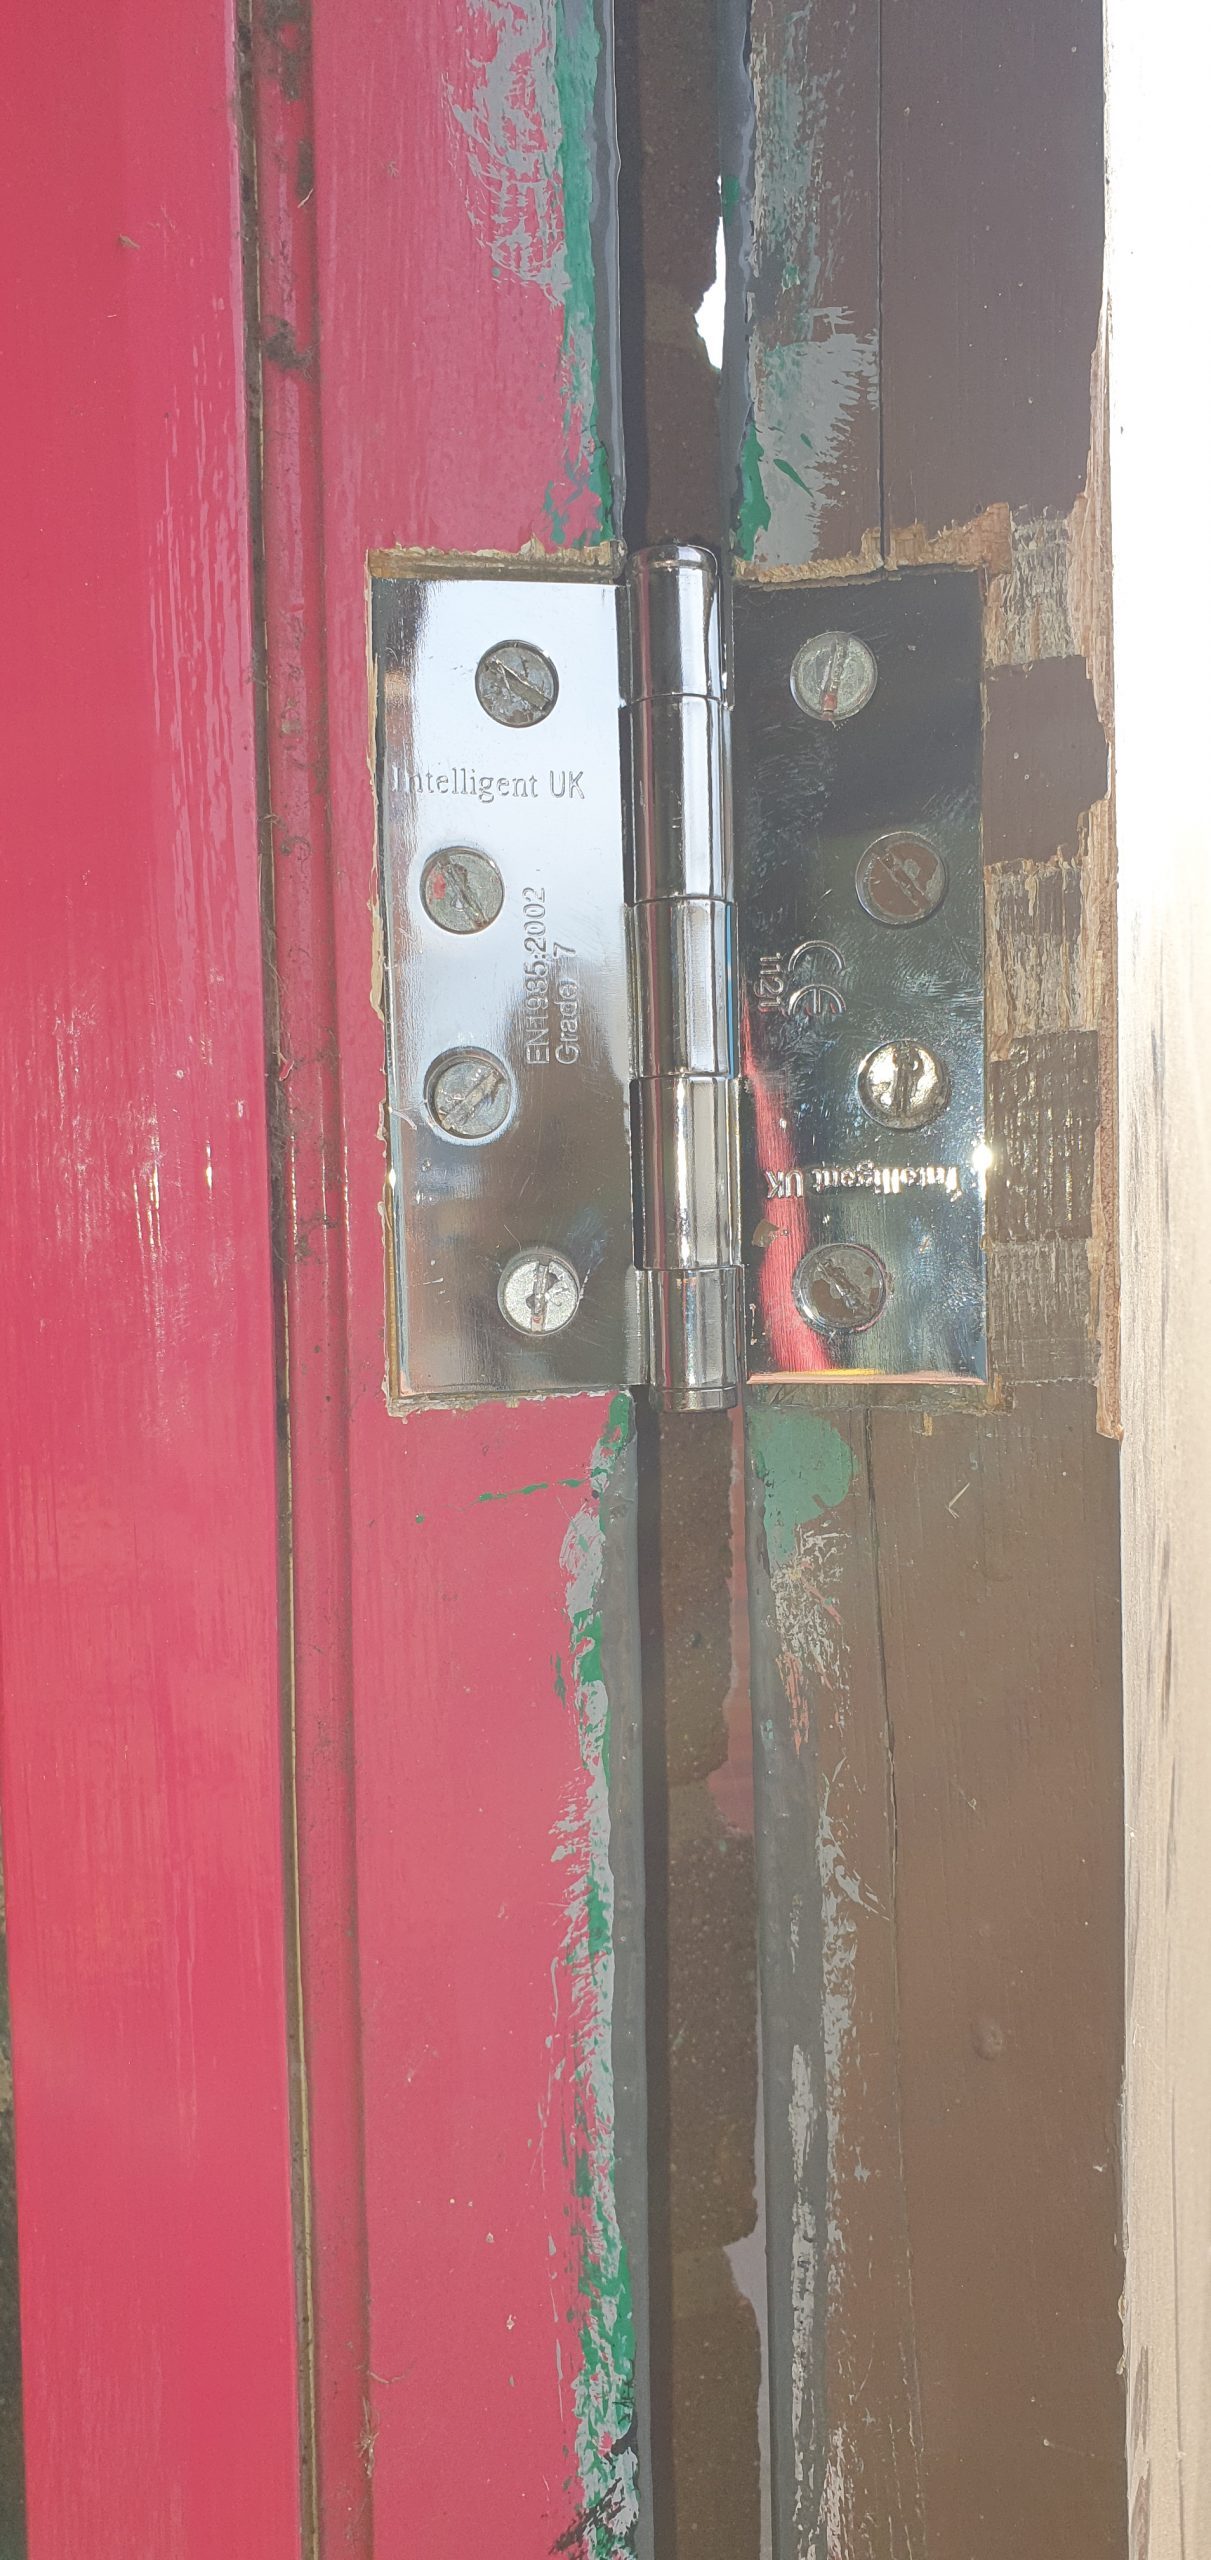 Lock broken. Didn't want to put a hole in the metal door, so I took the hinges off and then replaced them